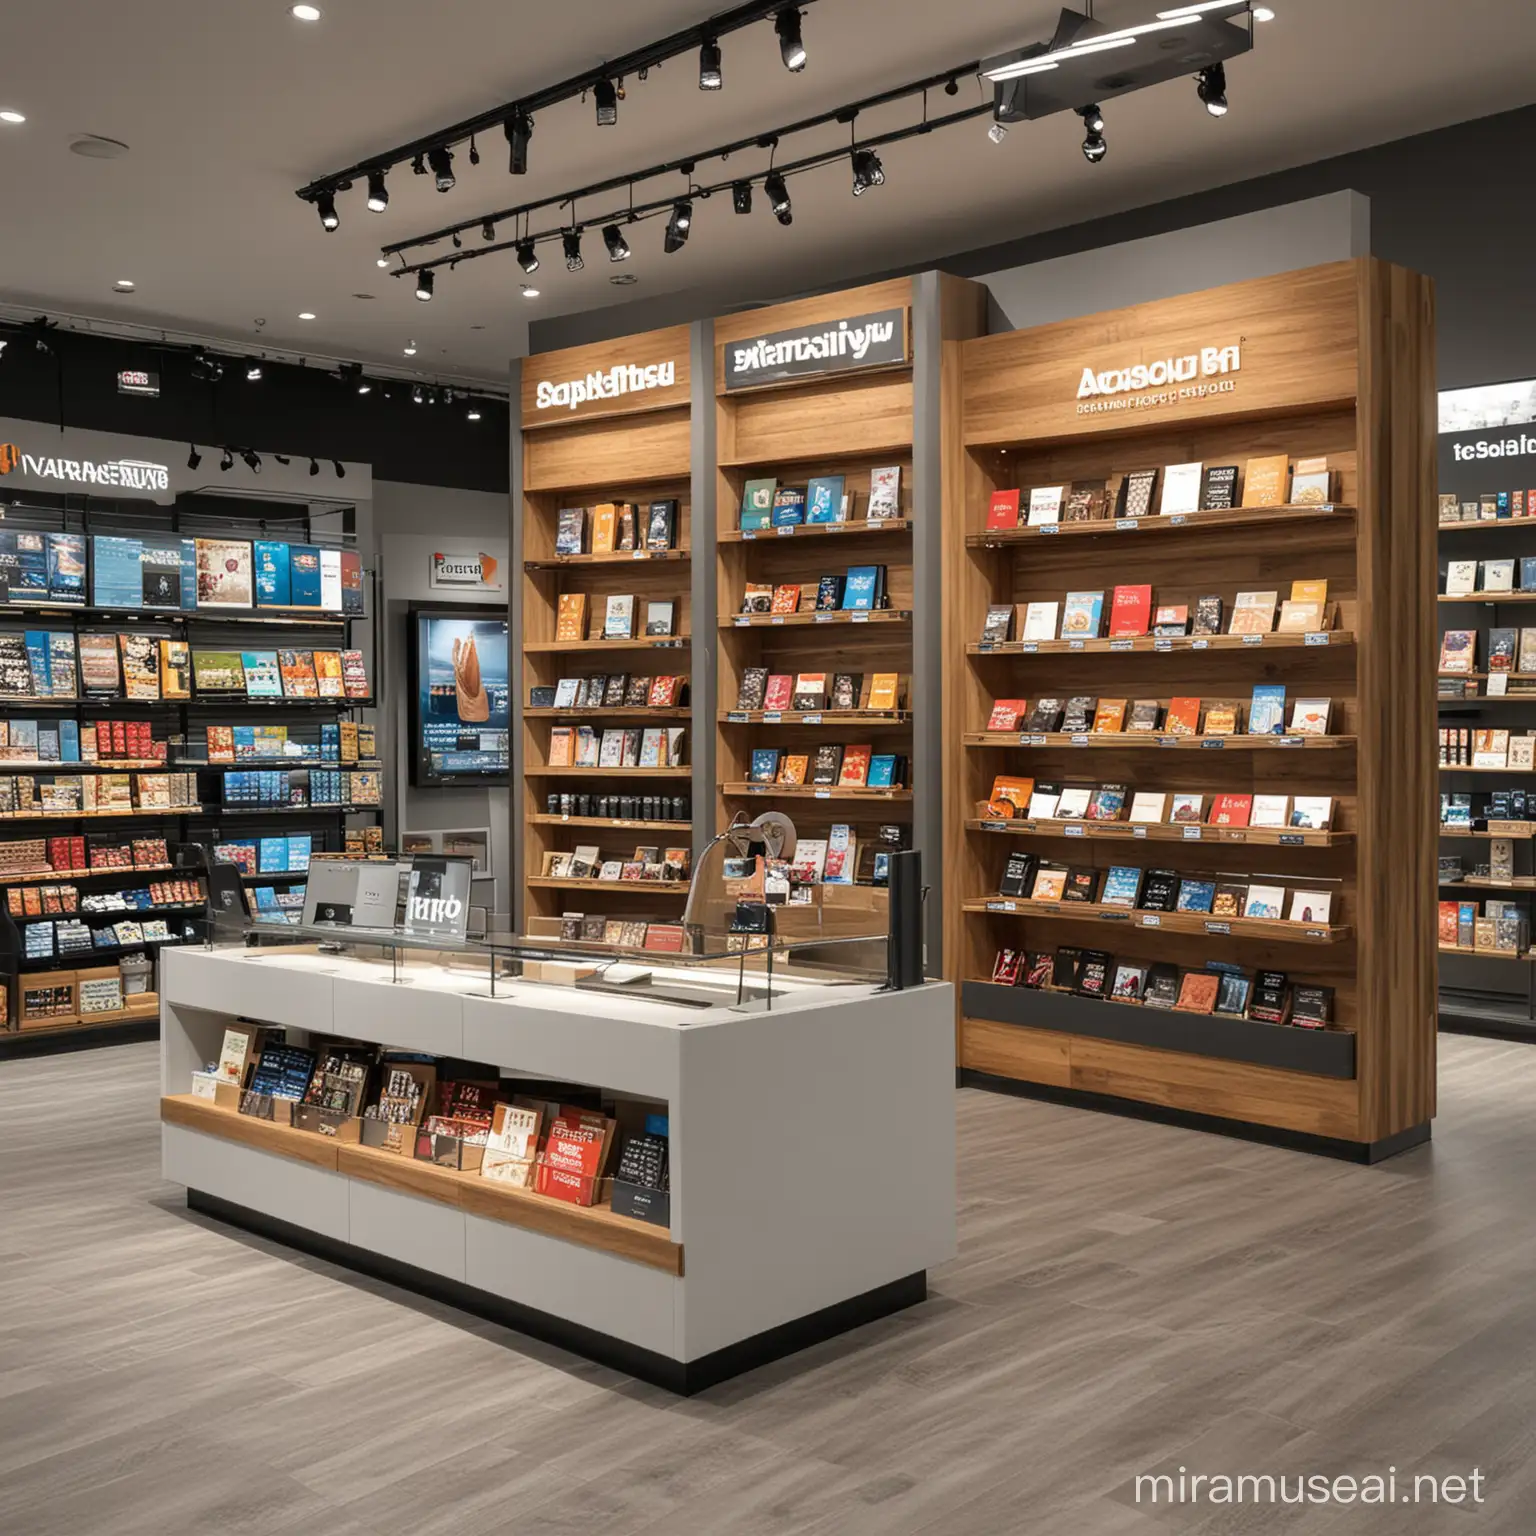 Generate innovative designs for retail display units, considering product type, space efficiency, visual appeal, flexibility, functionality, brand alignment, and sustainability.